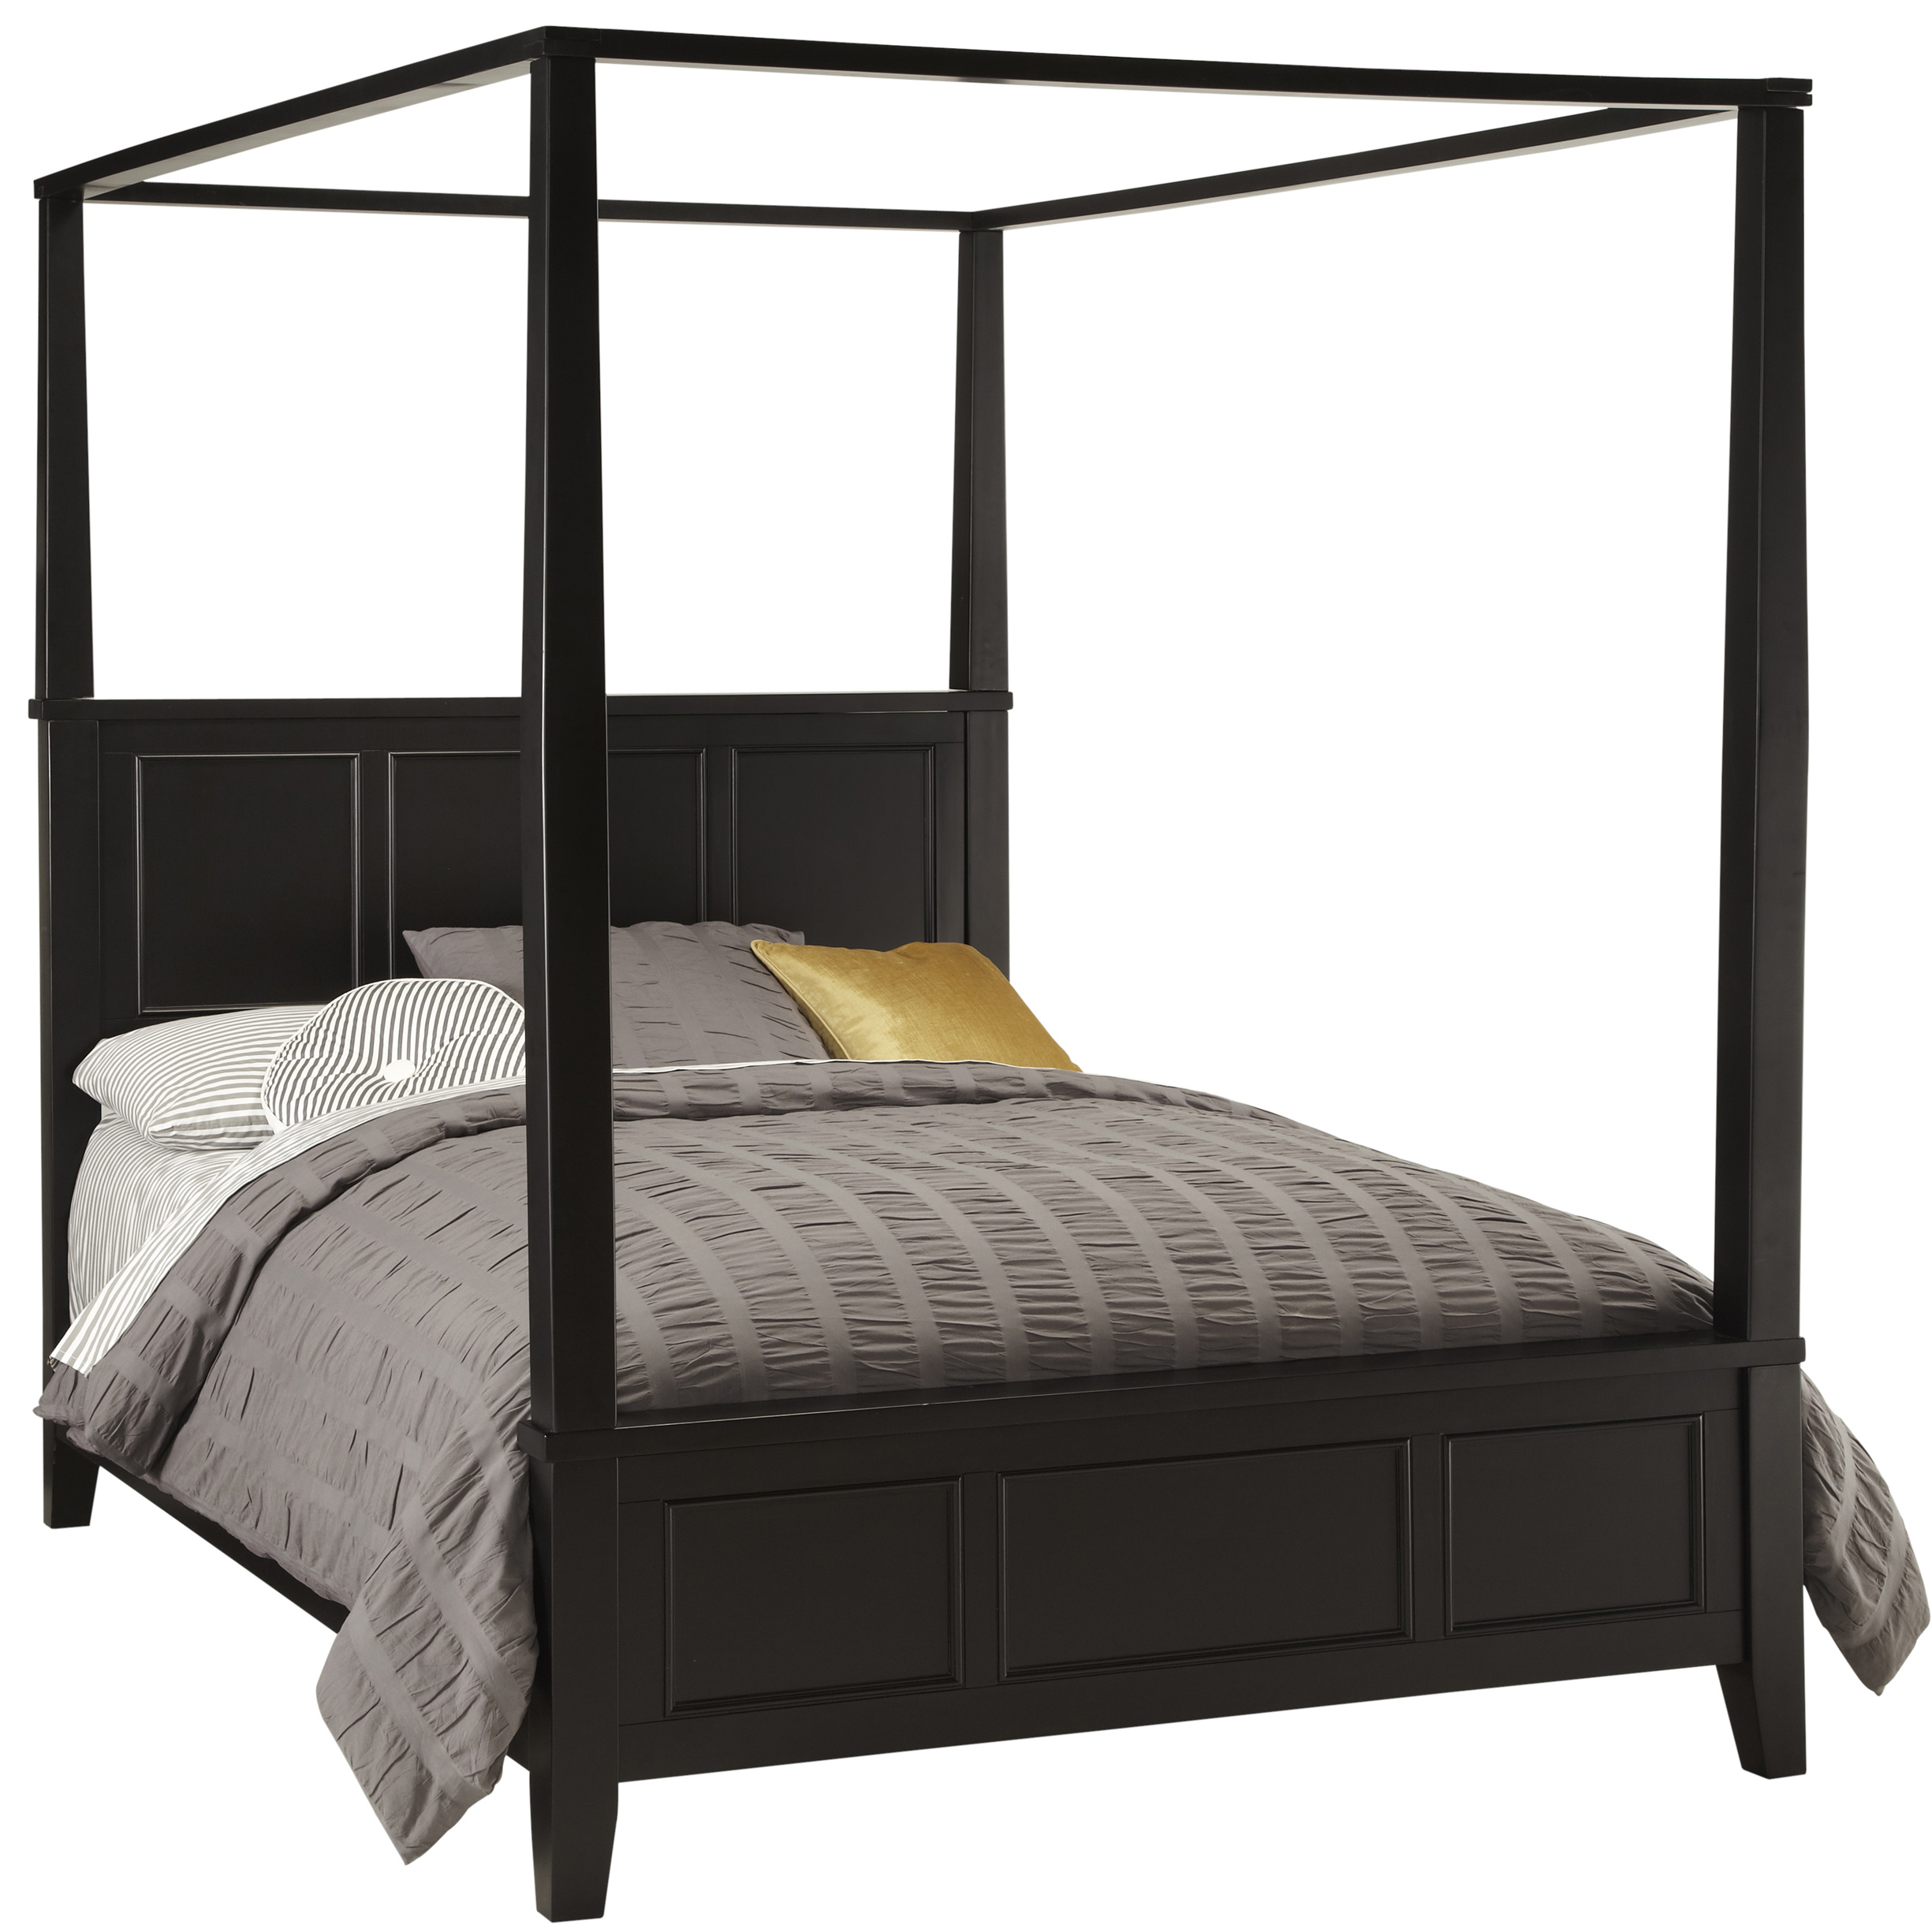 Home Styles Bedford Canopy Bed, King, Black